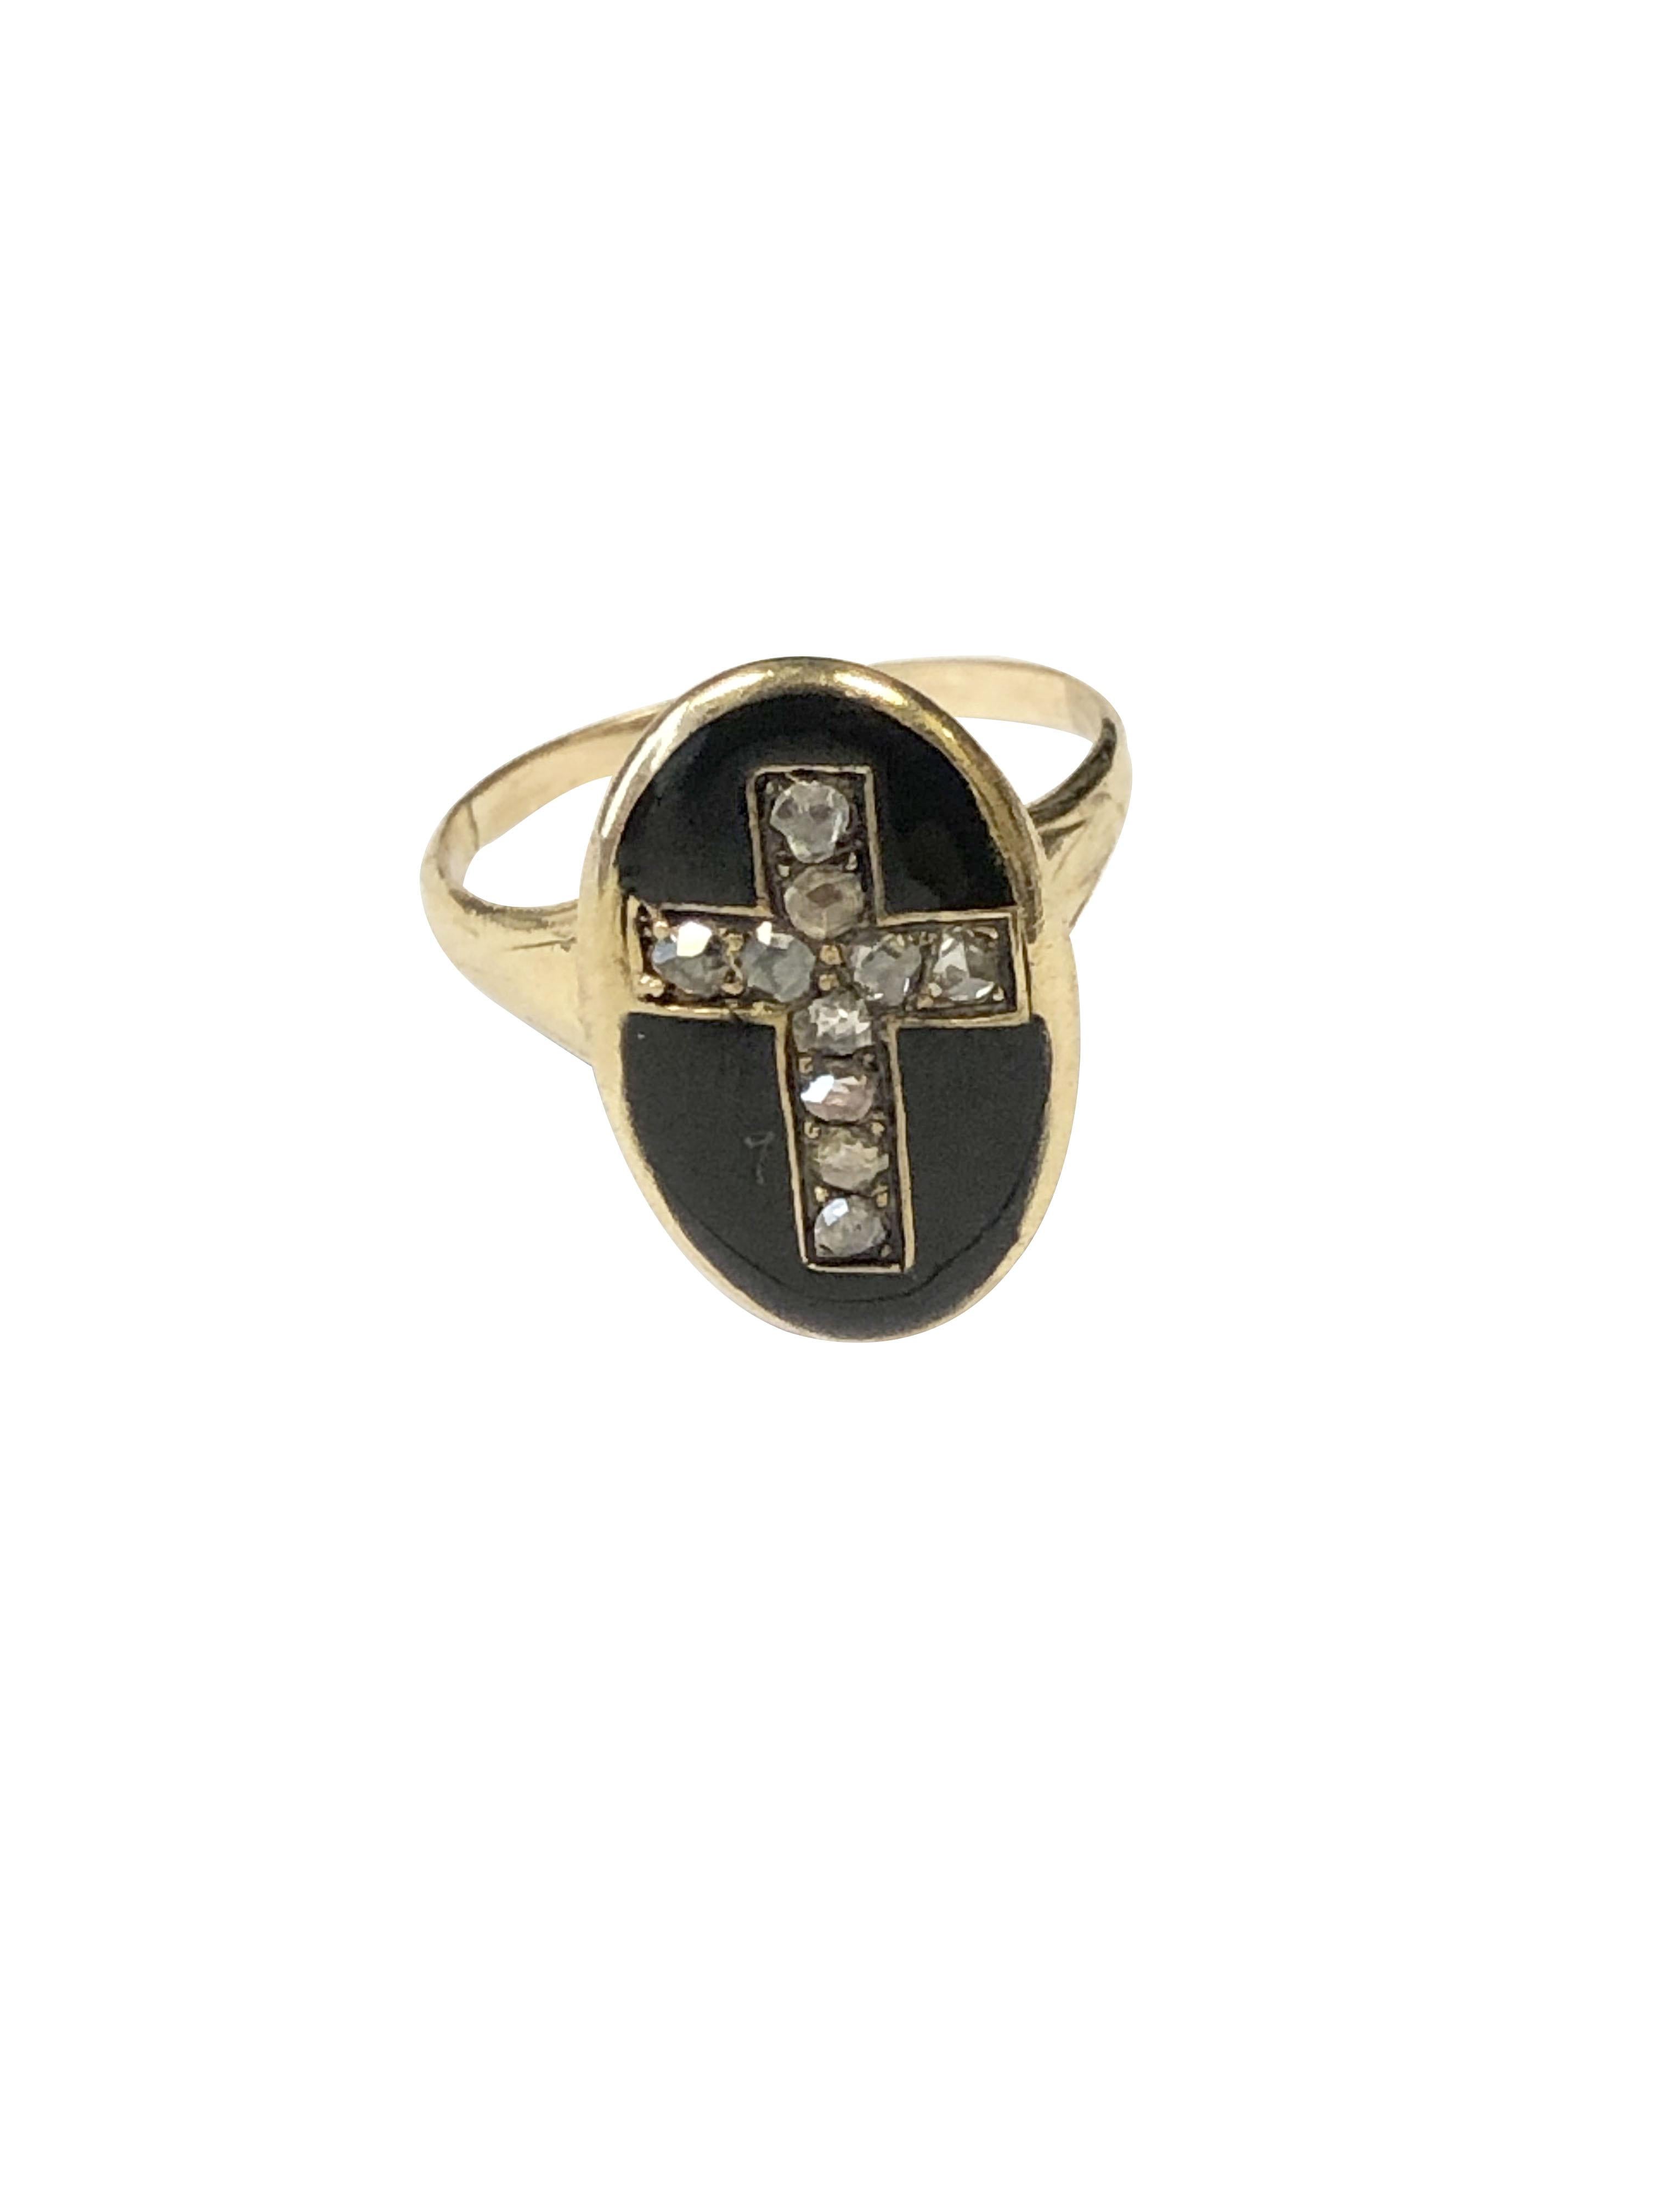 Circa 1850s Yellow Gold Mourning Ring, the top of the ring measures 5/8 X 7/16 inch and is finished in Black Enamel with an inset Cross of Rose Cut Diamonds. Finger size 5 3/4. 